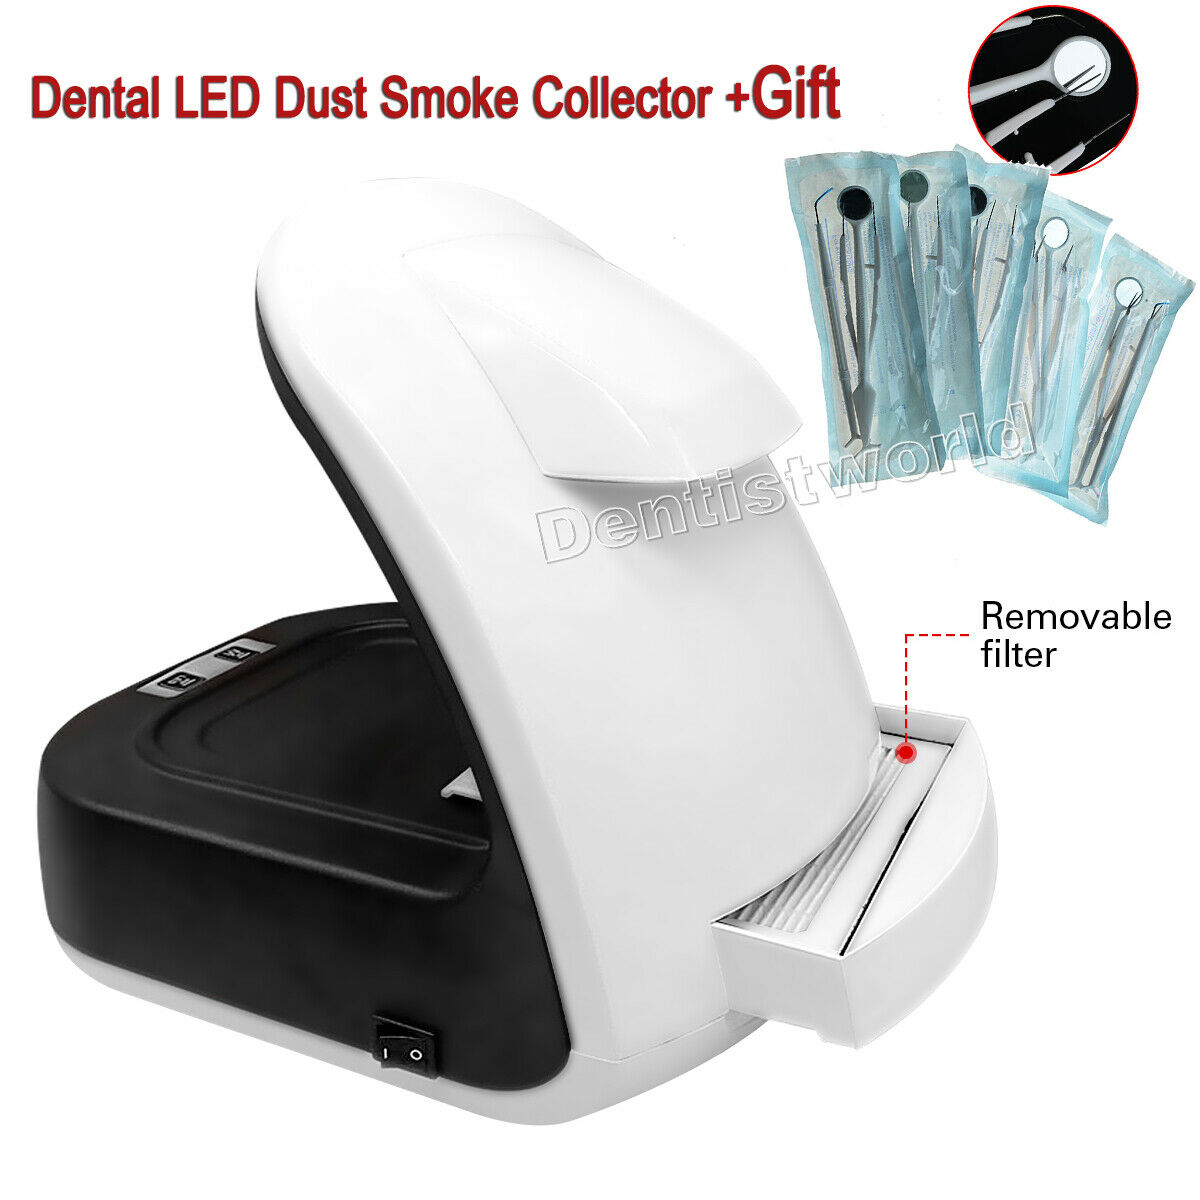 Dental Led Dust Smoke Collector Extract Grinding Sandblaster Vacuum Cleaner